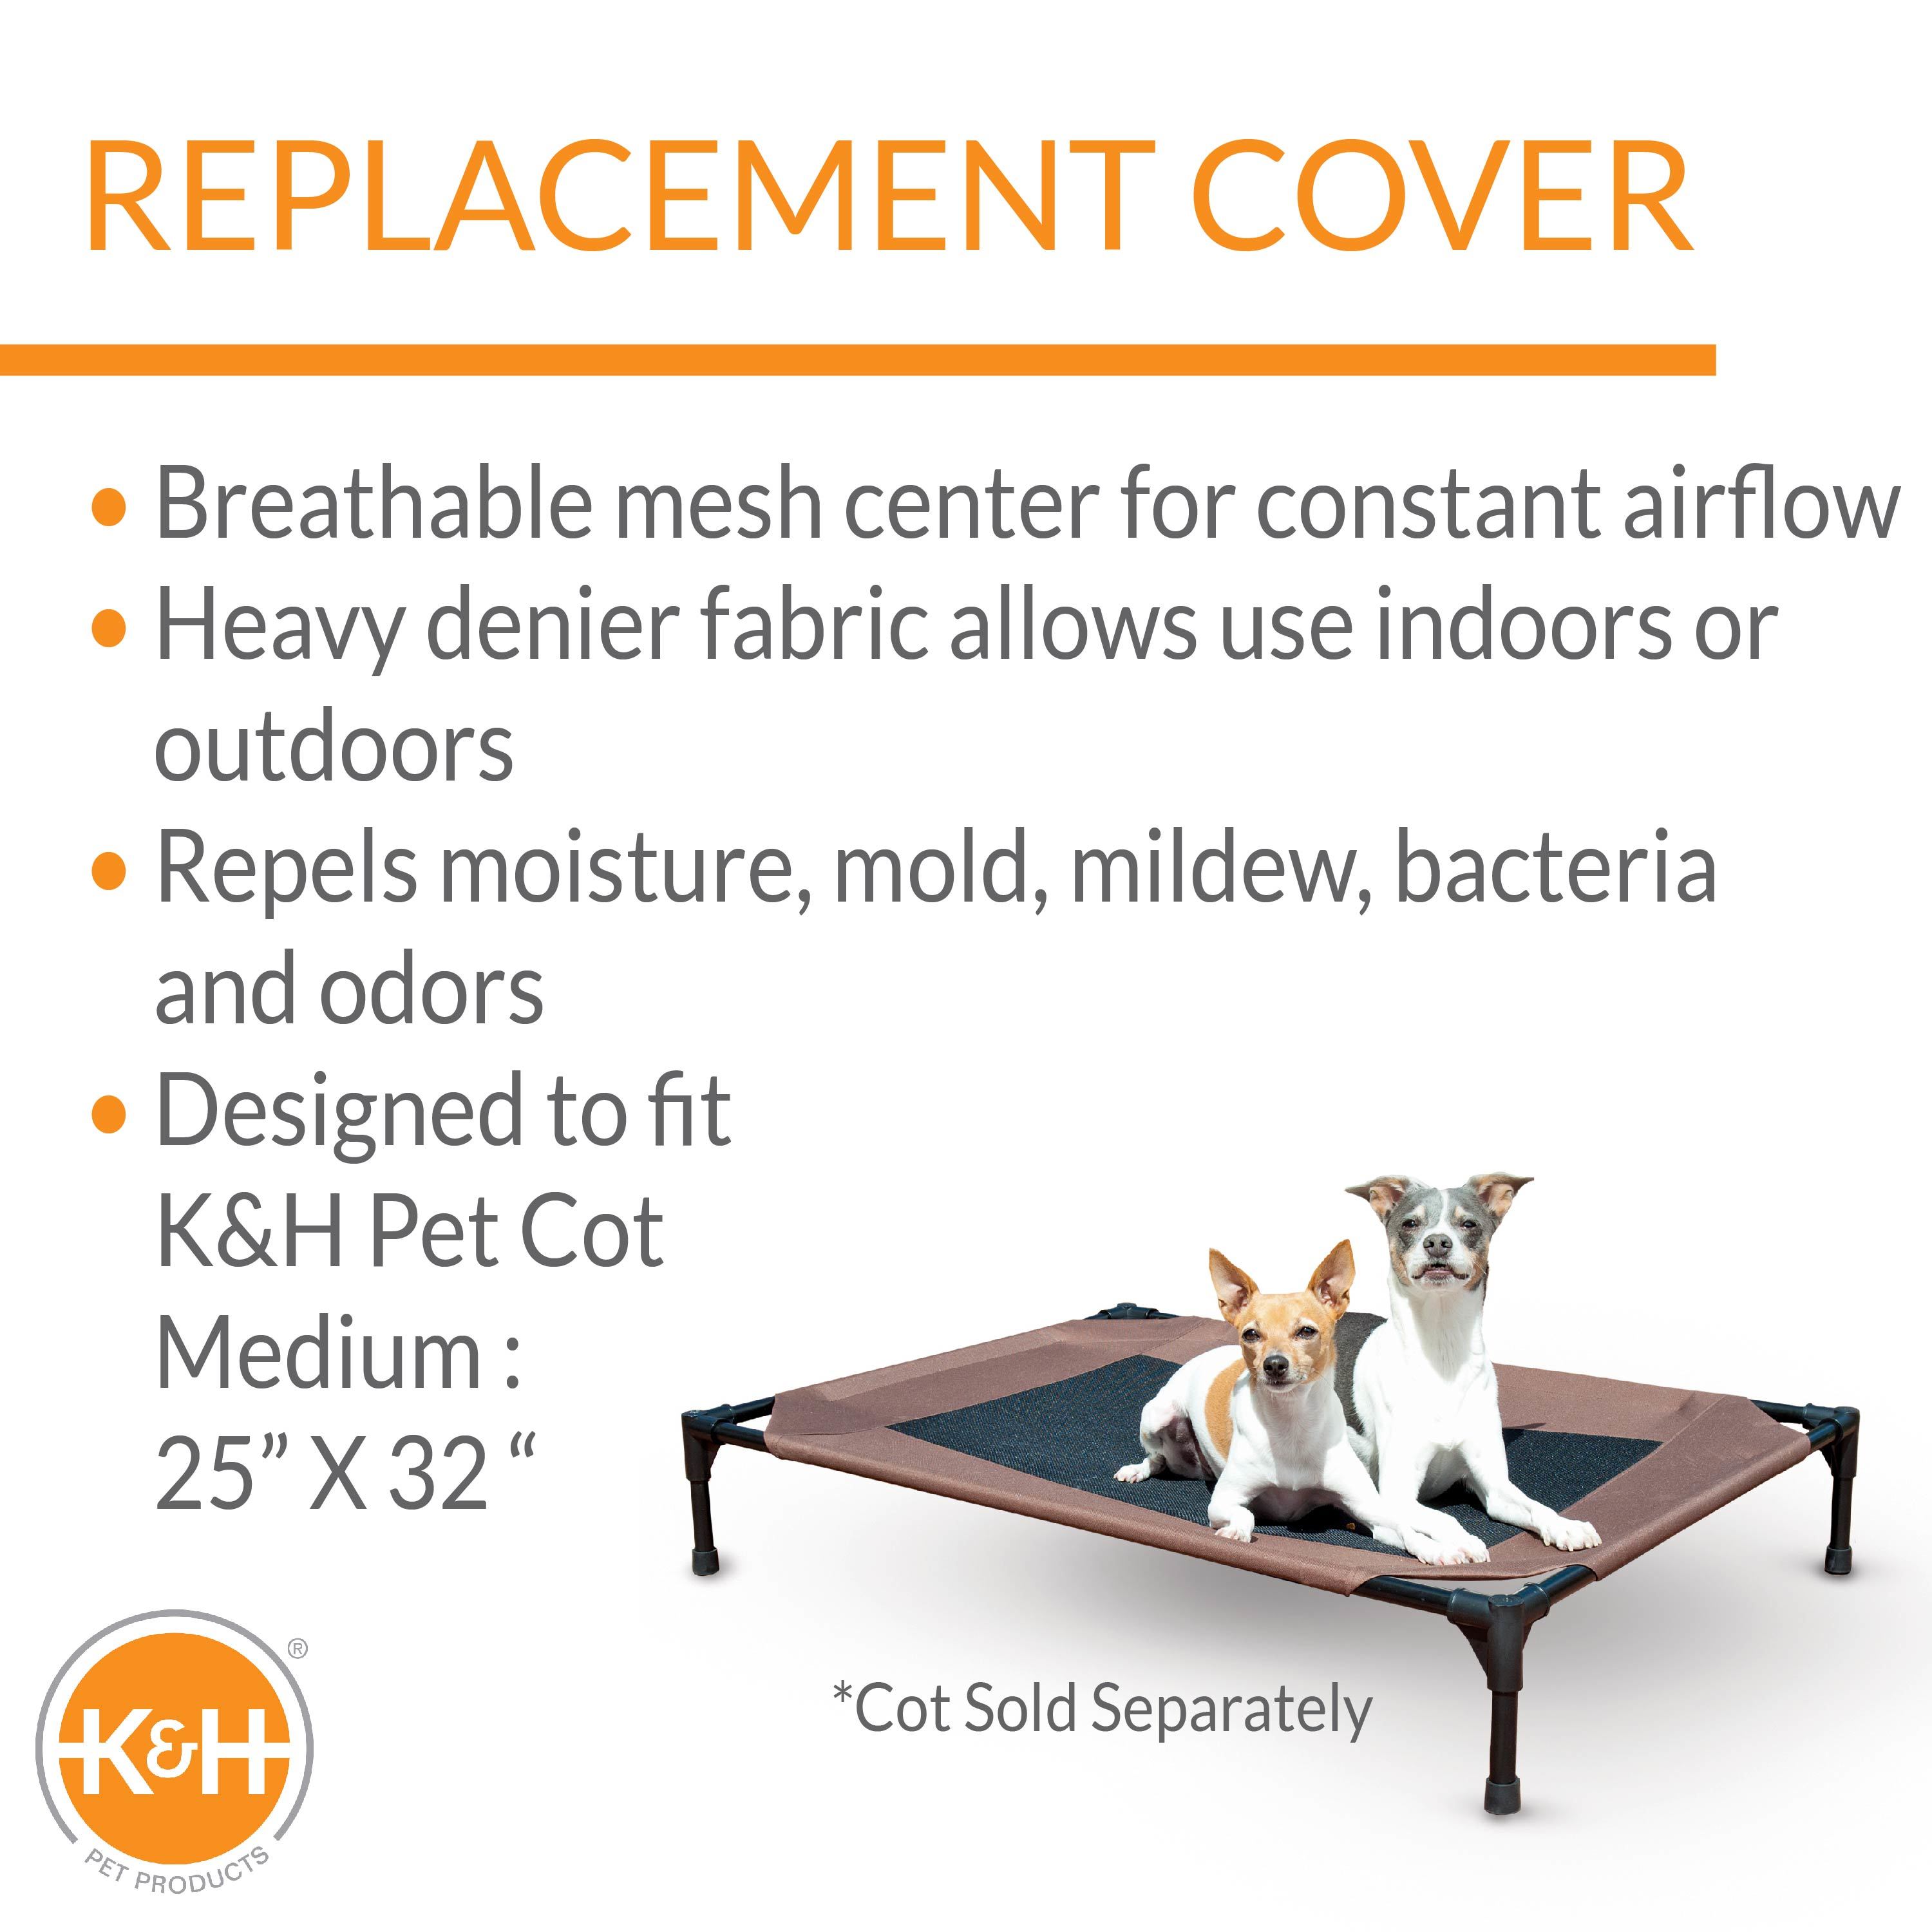 K&H Pet Products Original Pet Cot Replacement Cover (Cot Sold Separately) Chocolate/Black Mesh Medium 25 X 32 Inches - image 5 of 8